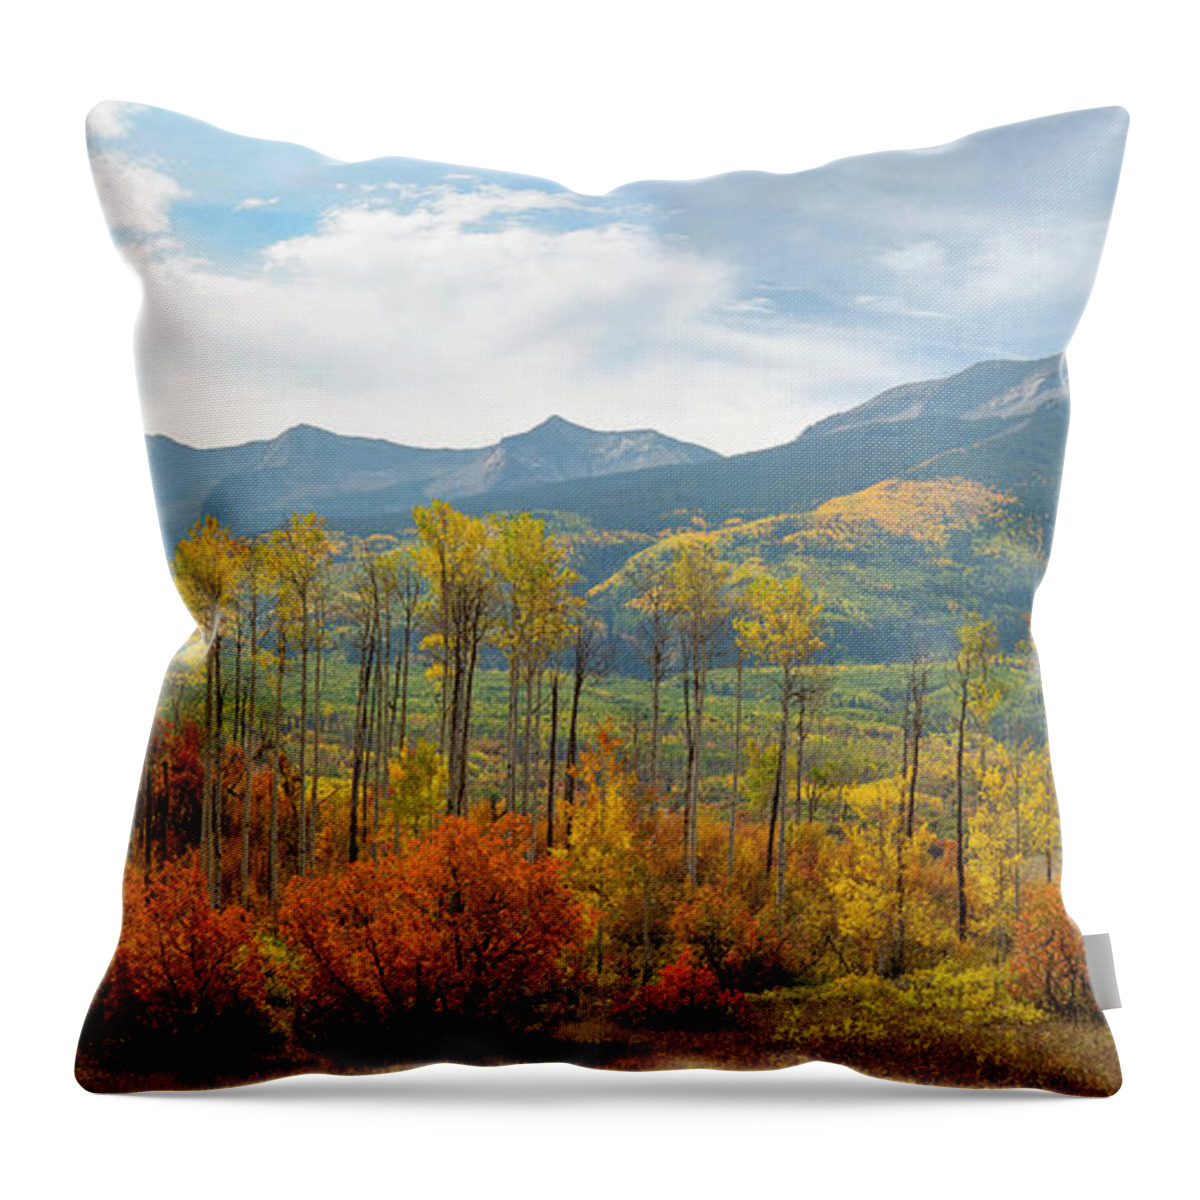 Autumn Throw Pillow featuring the photograph Beckwith Autumn by Aaron Spong